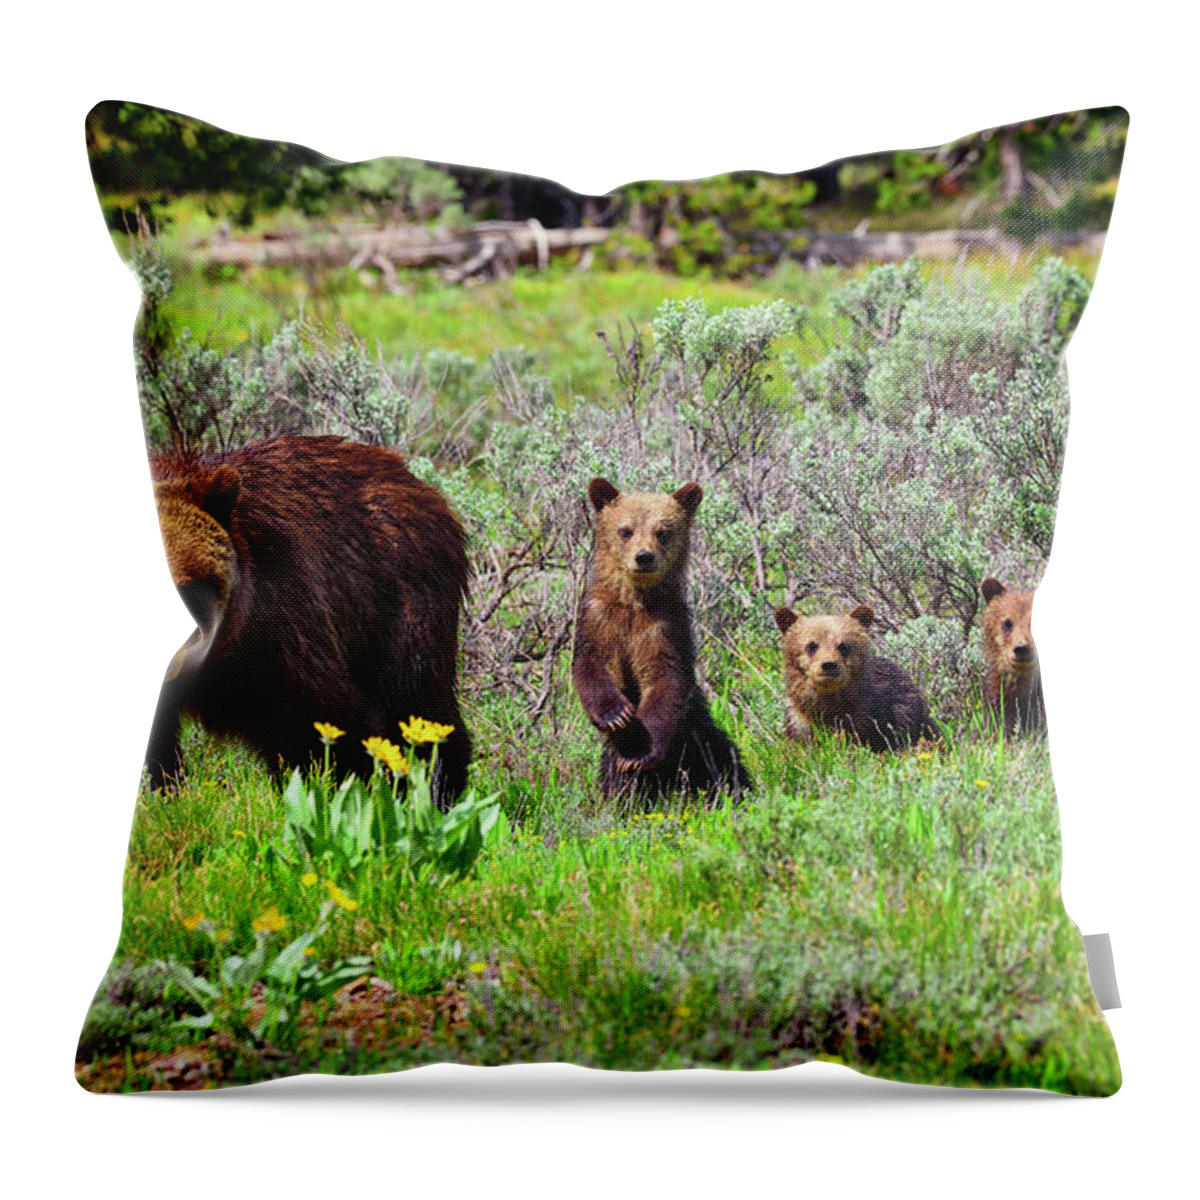 Grizzly 399 Throw Pillow featuring the photograph Where Are We Going Mom? by Greg Norrell